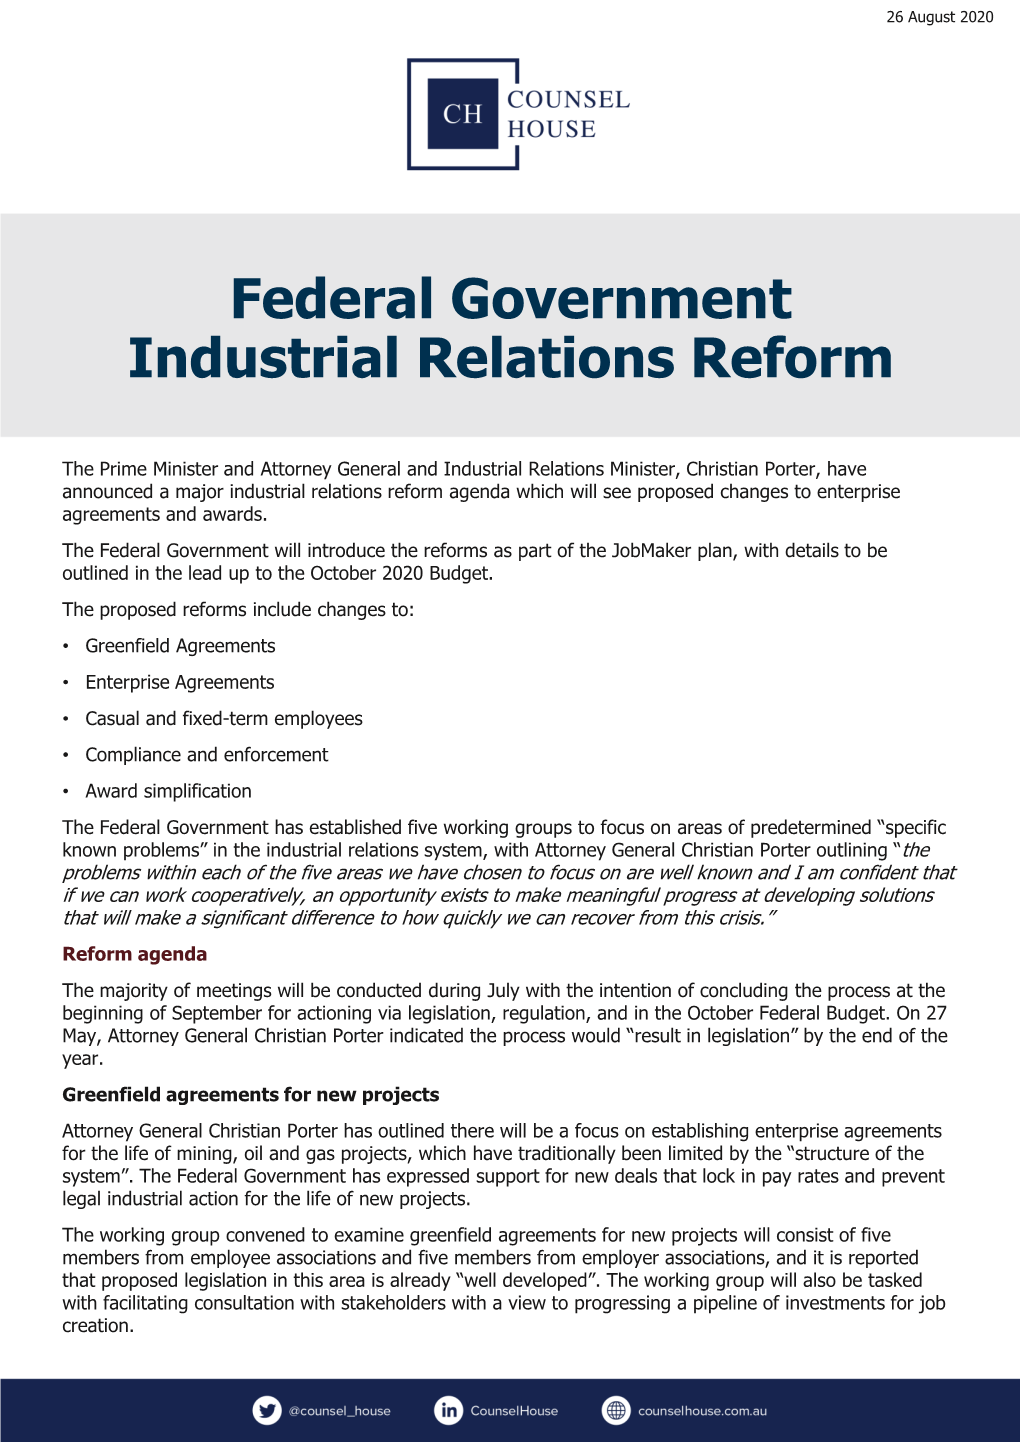 Federal Government Industrial Relations Reform